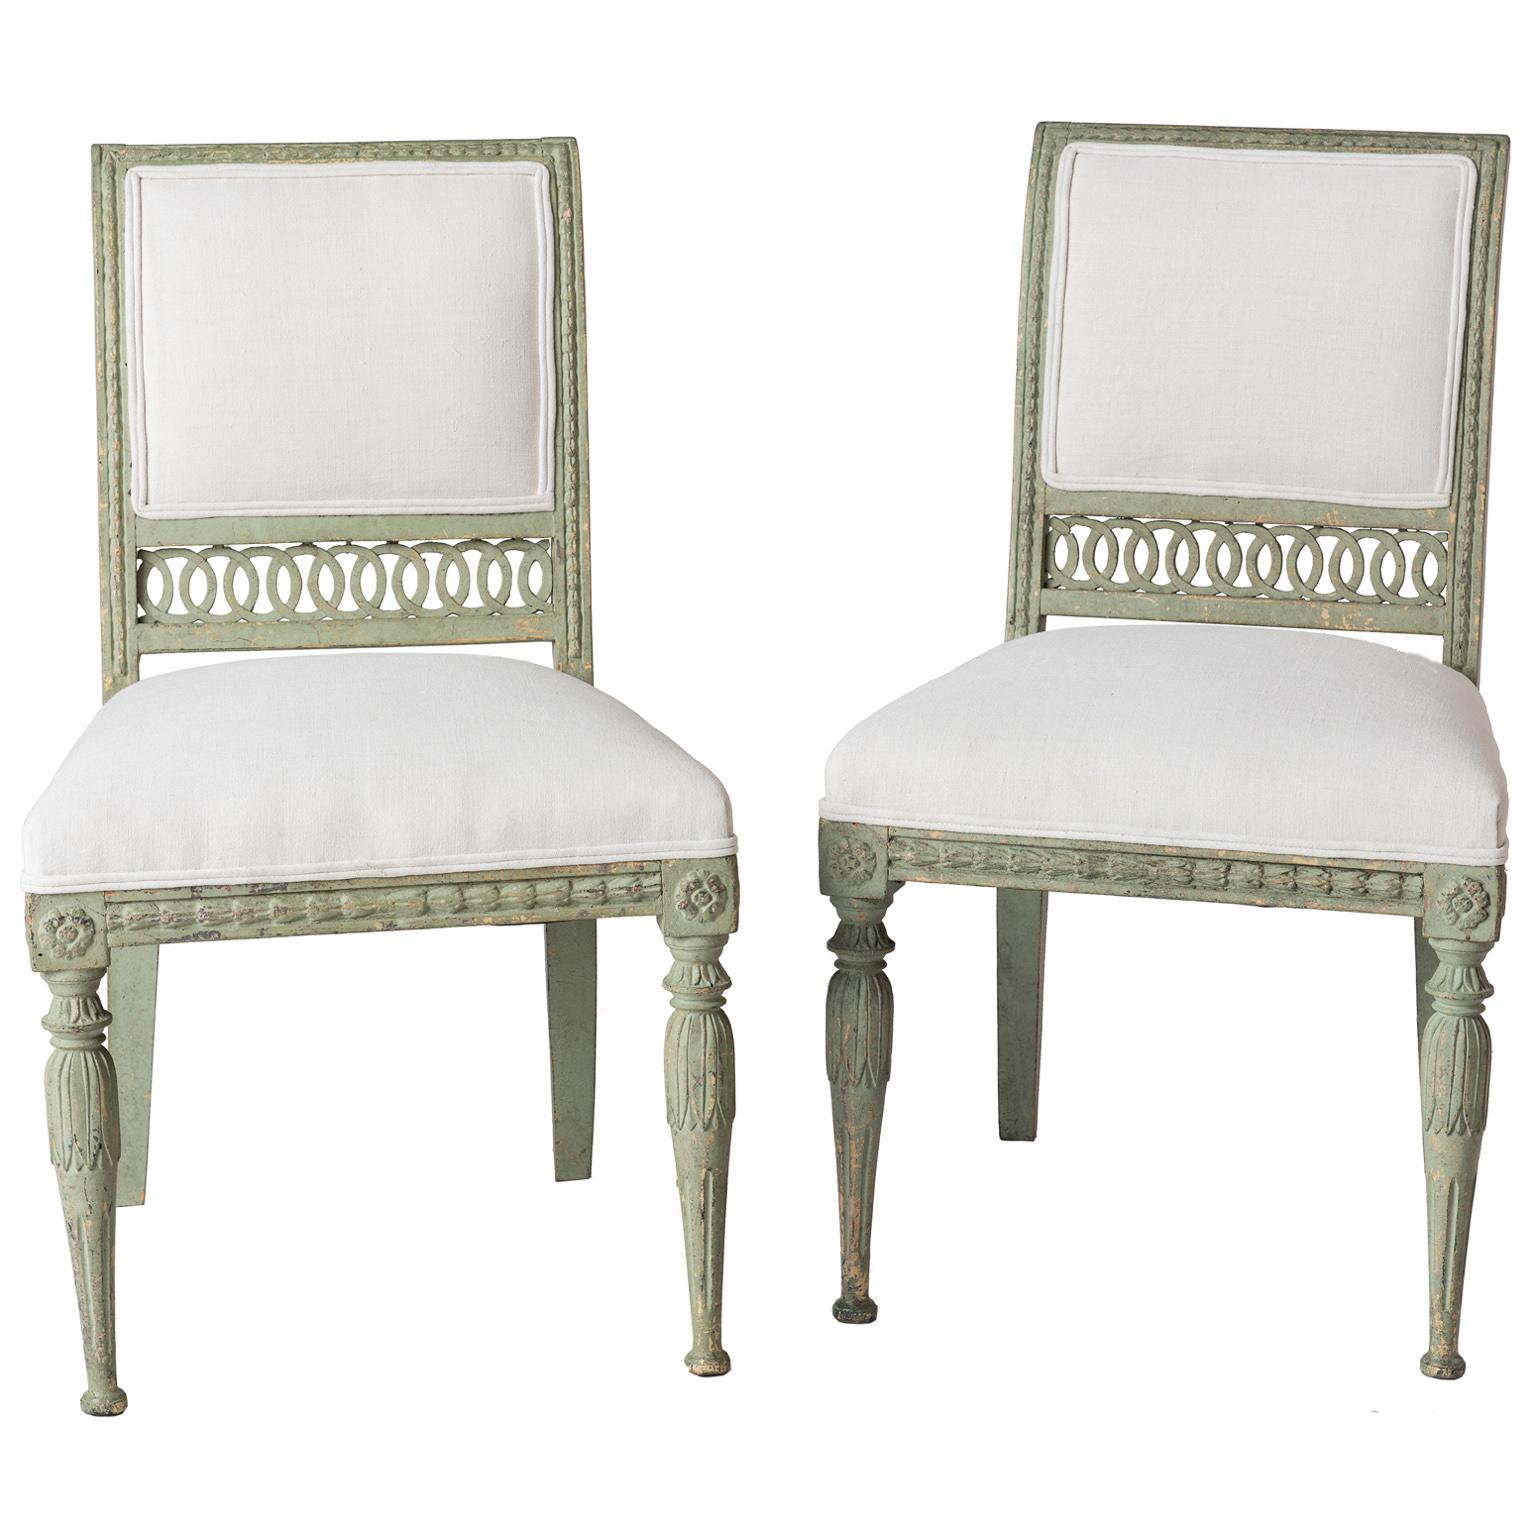 Pair of Swedish Gustavian Period Side Chairs in Old Green Paint, circa 1800 For Sale